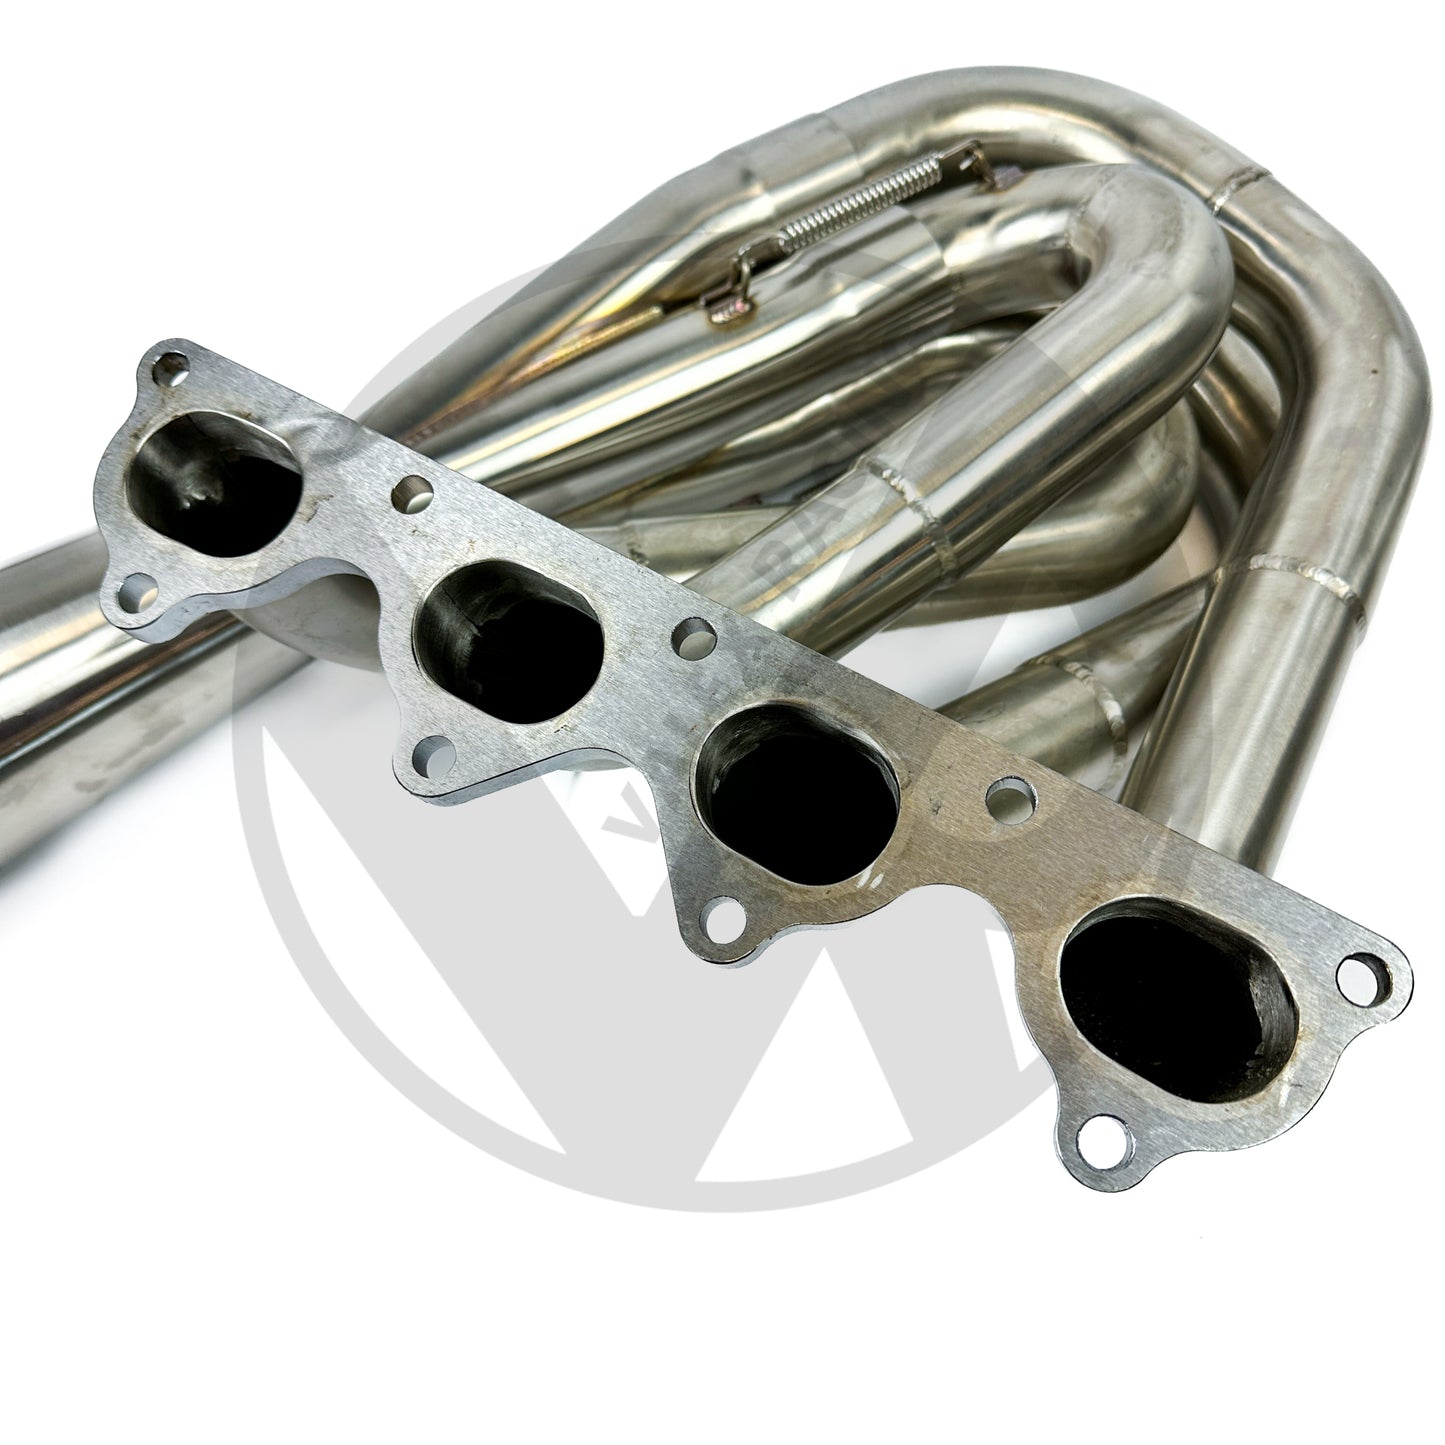 Private Label MFG (PLM) Power Driven H-Series Hood Exit Race Header 4-1 Megaphone for Honda Acura H22 F20B H22A